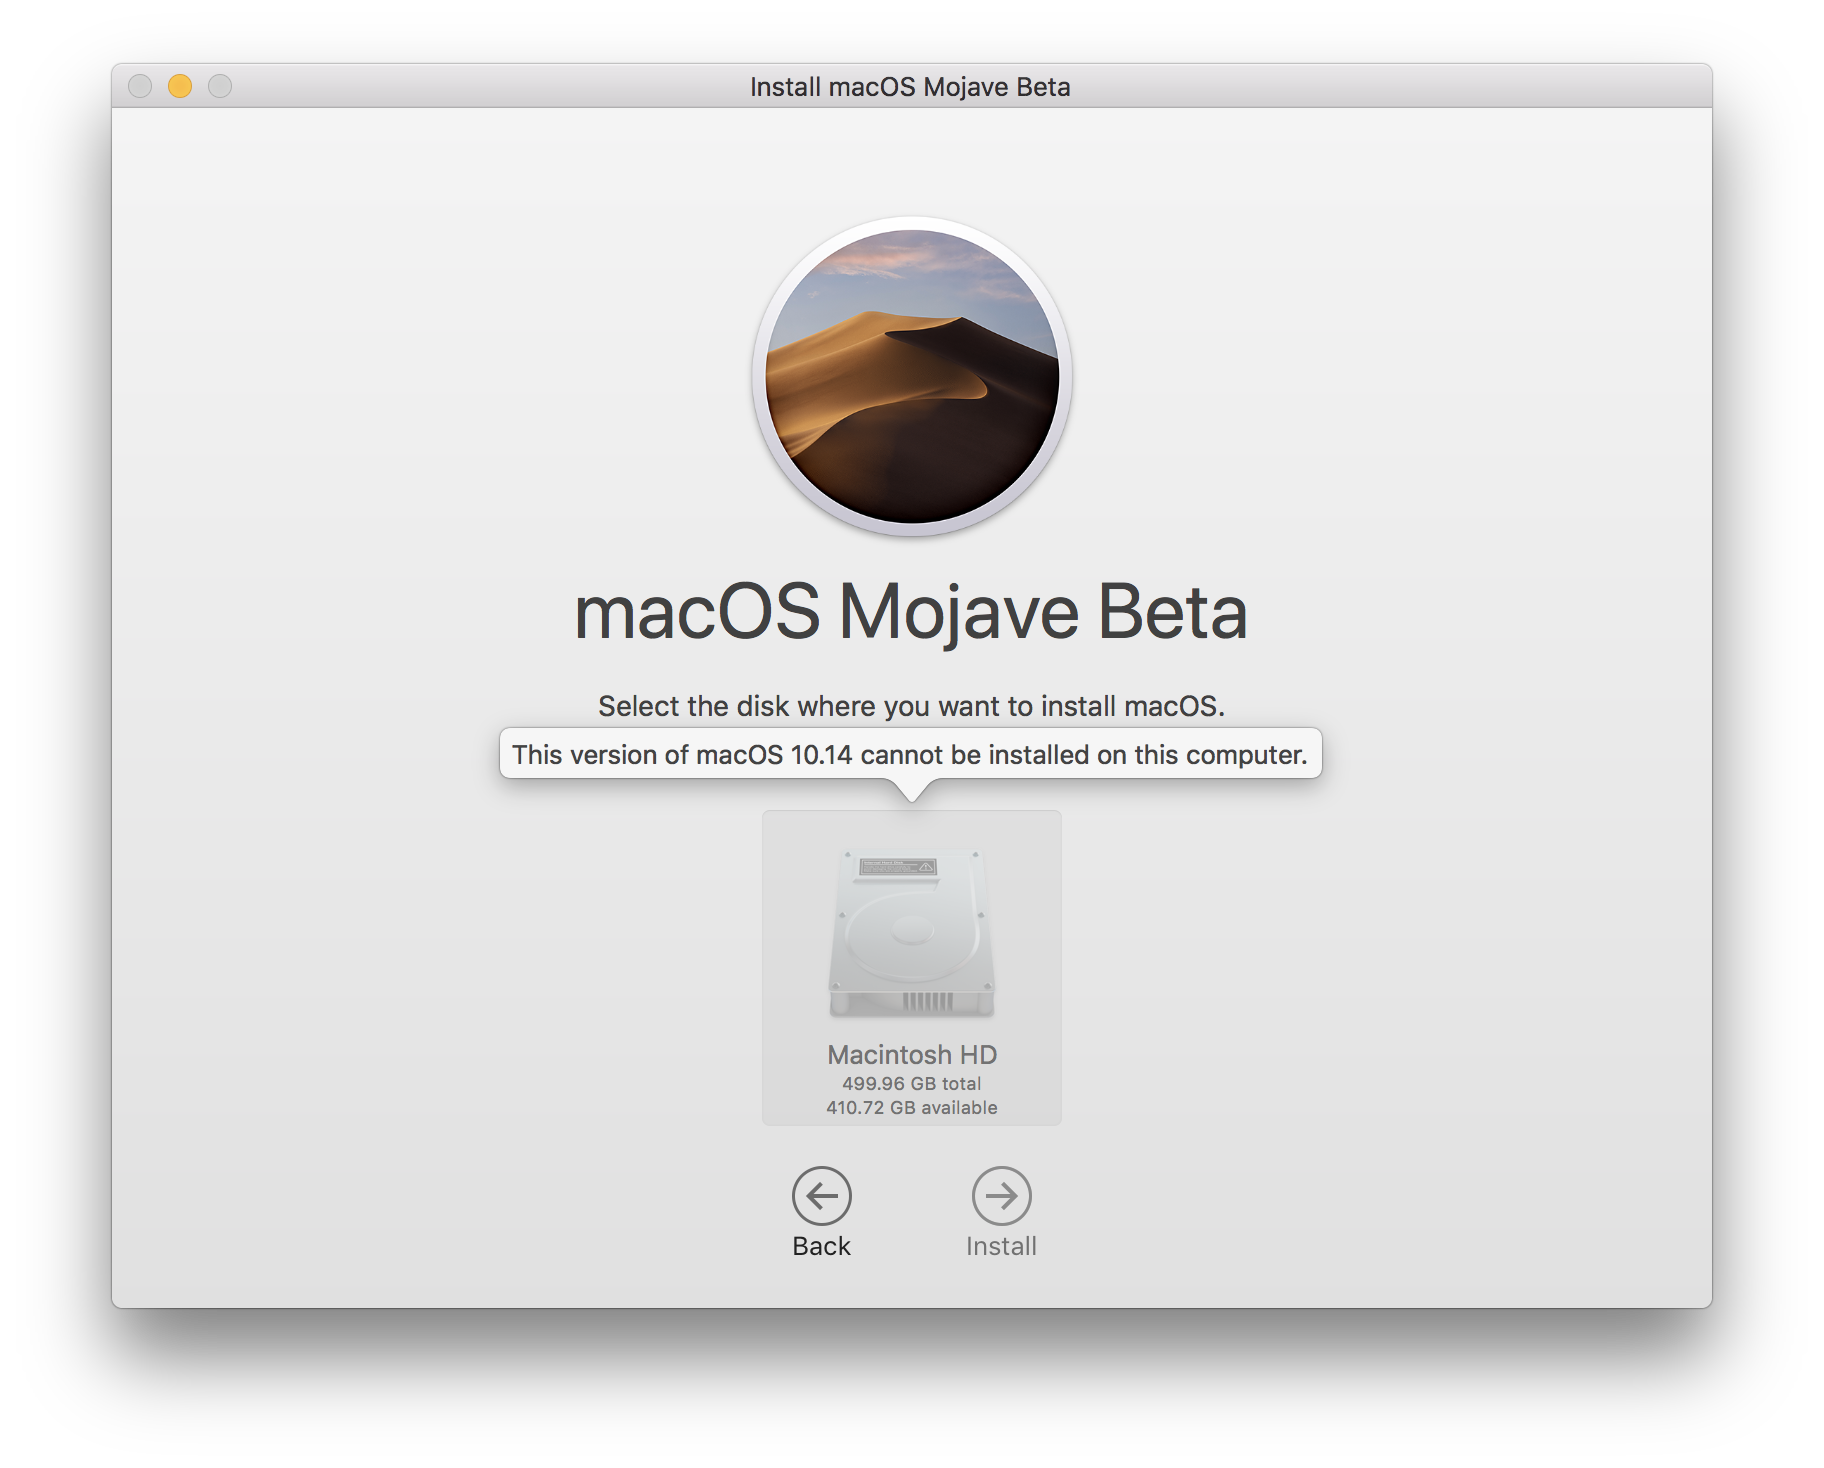 can't install macos mojave